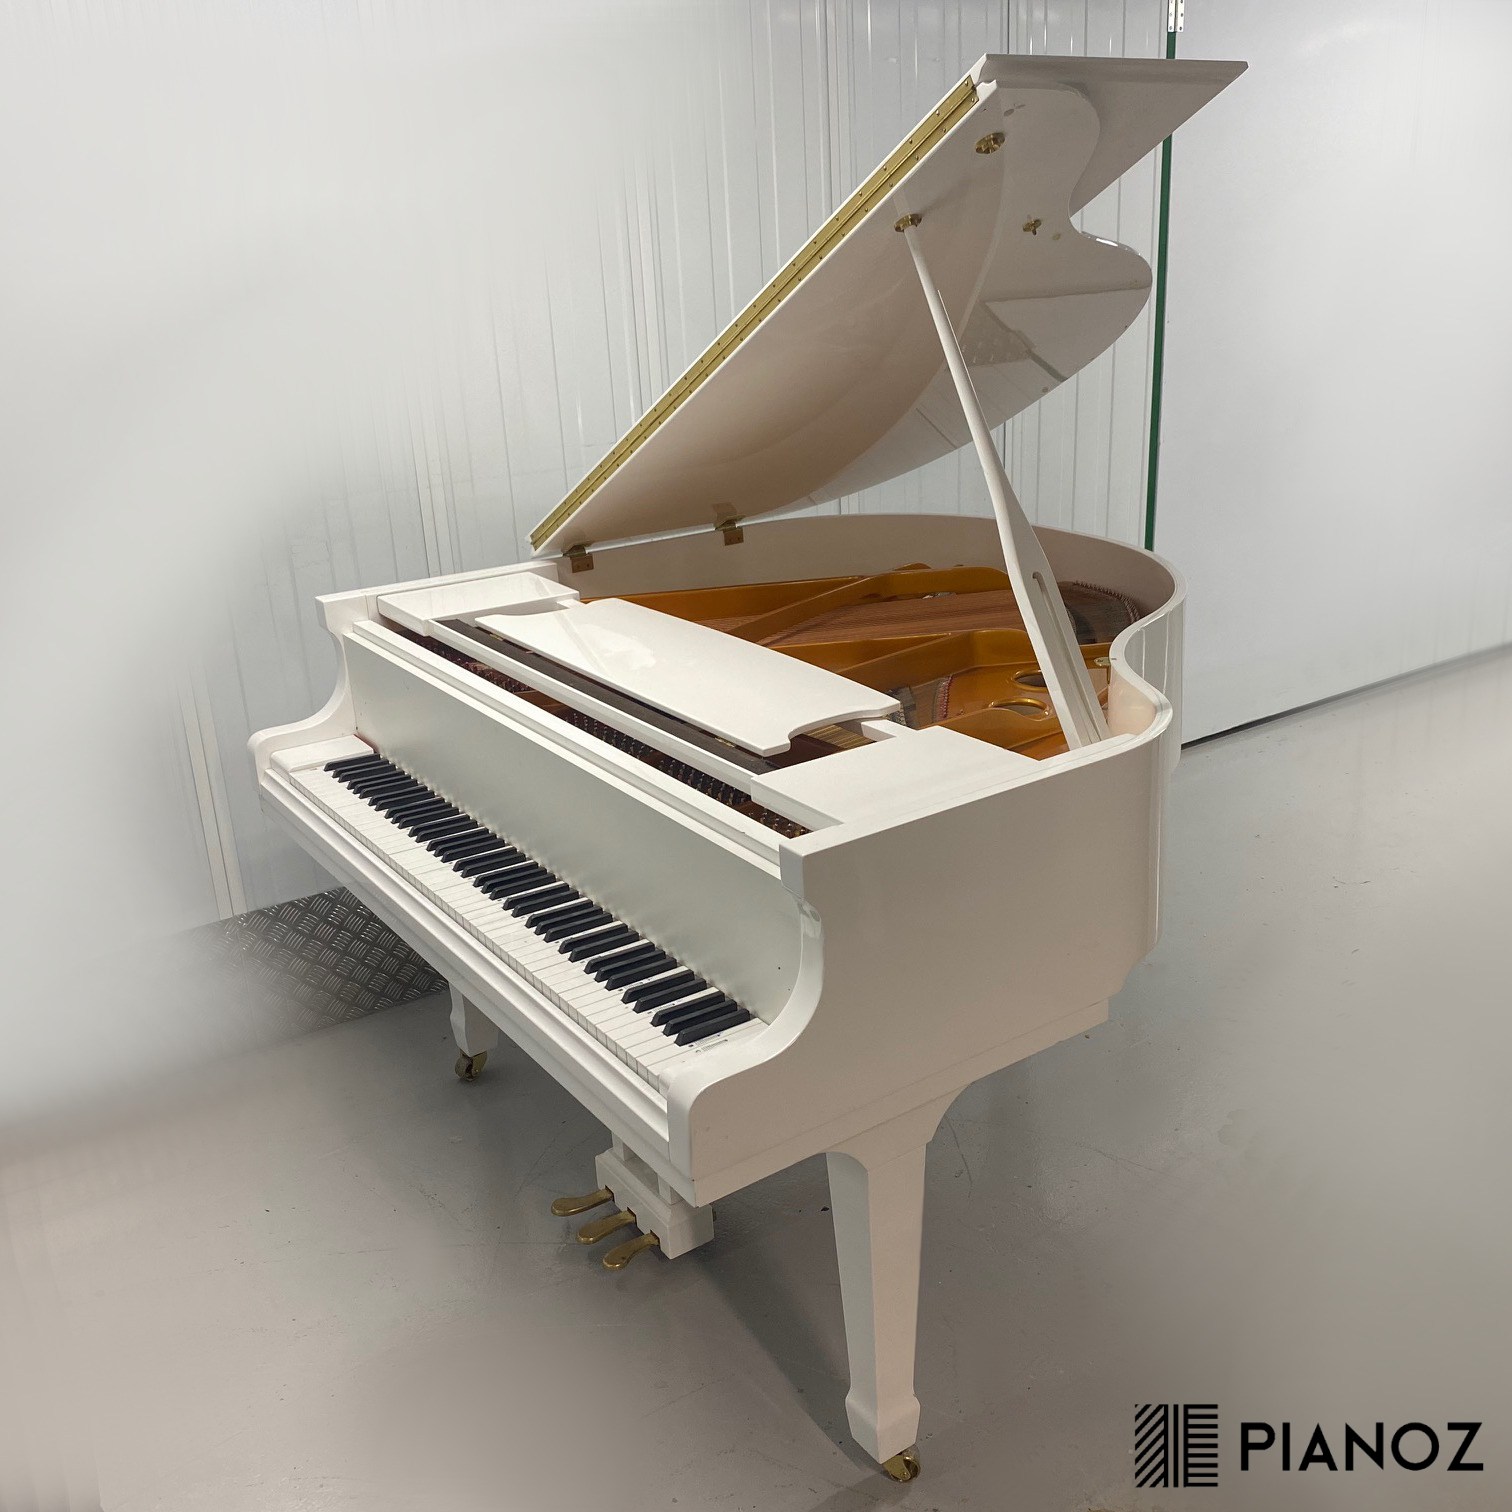 Steinbach Pianodisc IQ Self Playing Baby Grand Piano piano for sale in UK